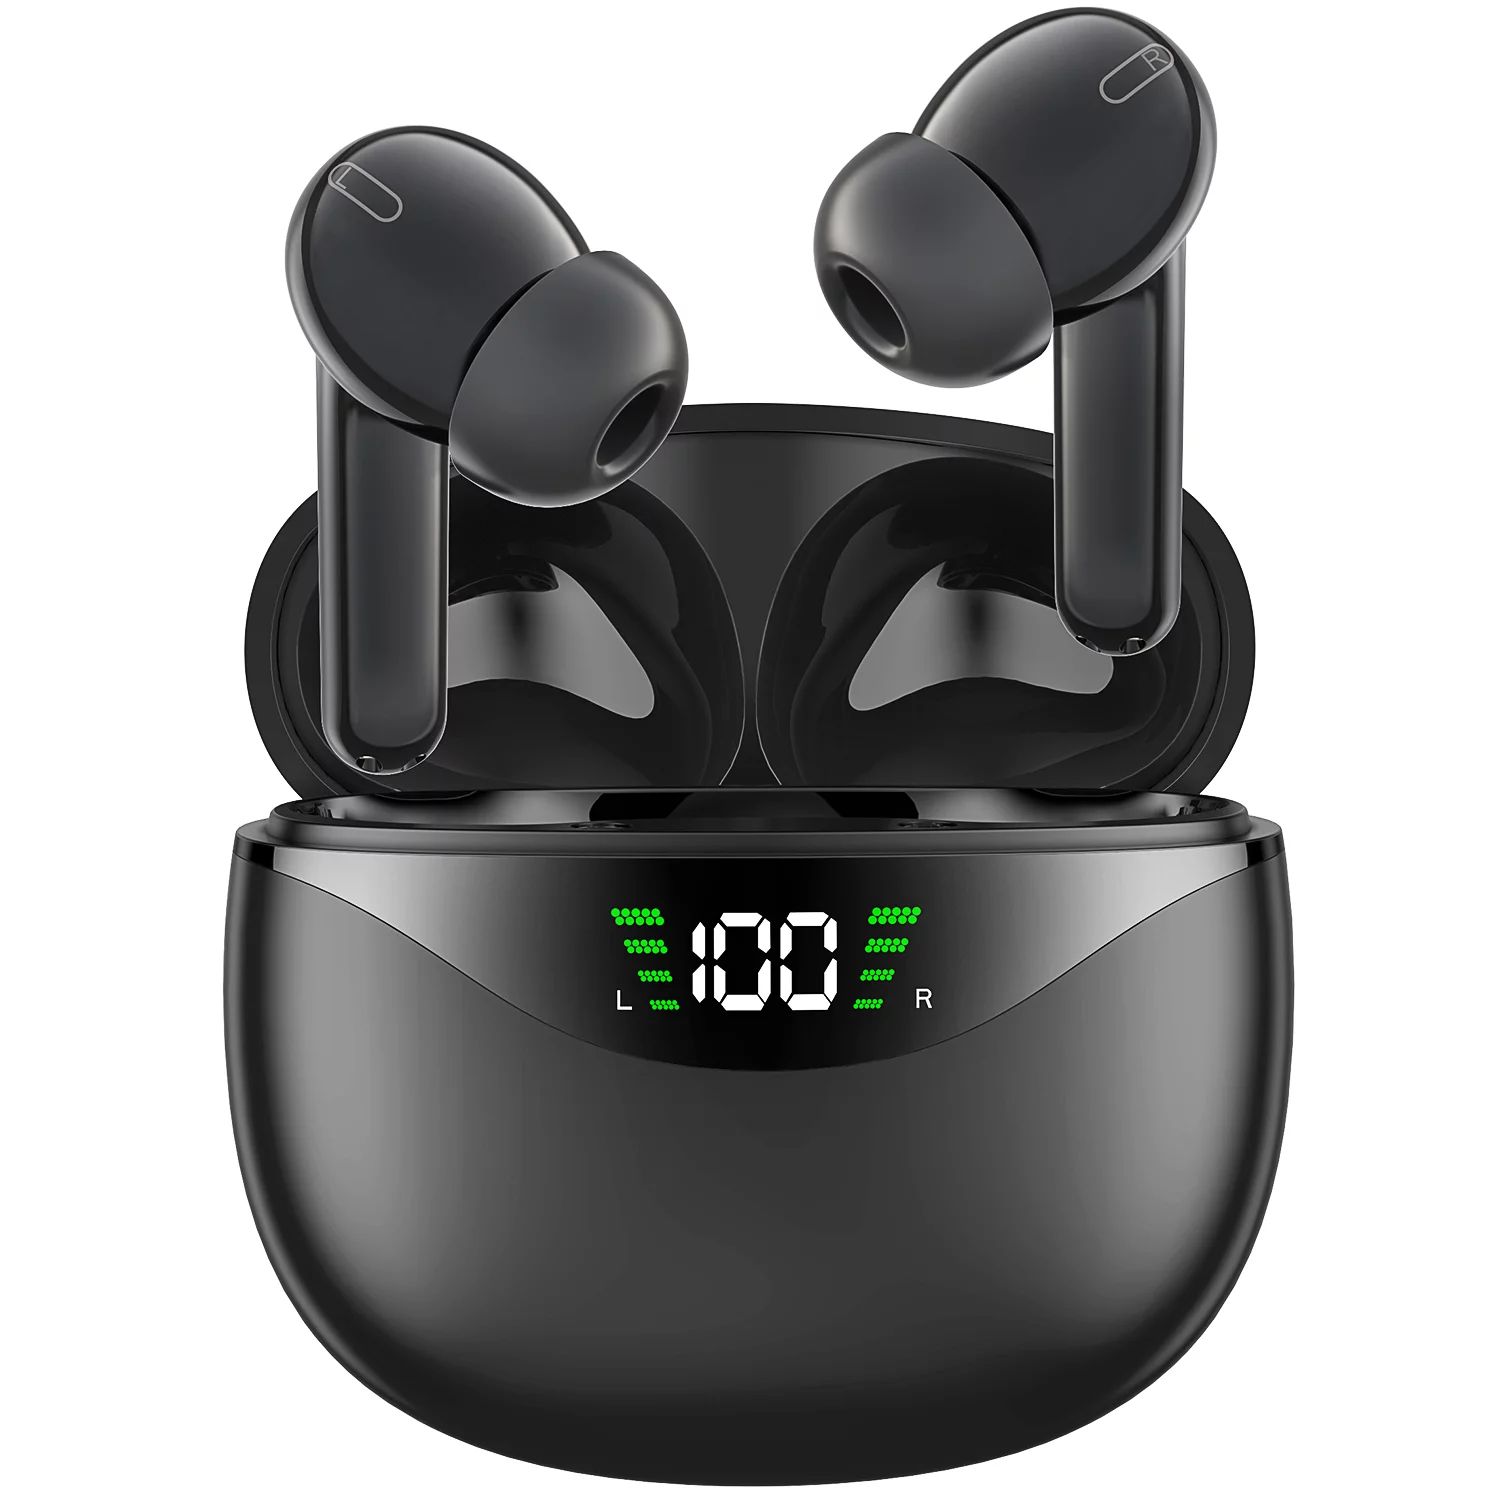 Wireless Earbuds, Bluetooth 5.1 Headphone 30Hrs Playtime with USB-C Fast Charging Case, IPX7 Wate... | Walmart (US)